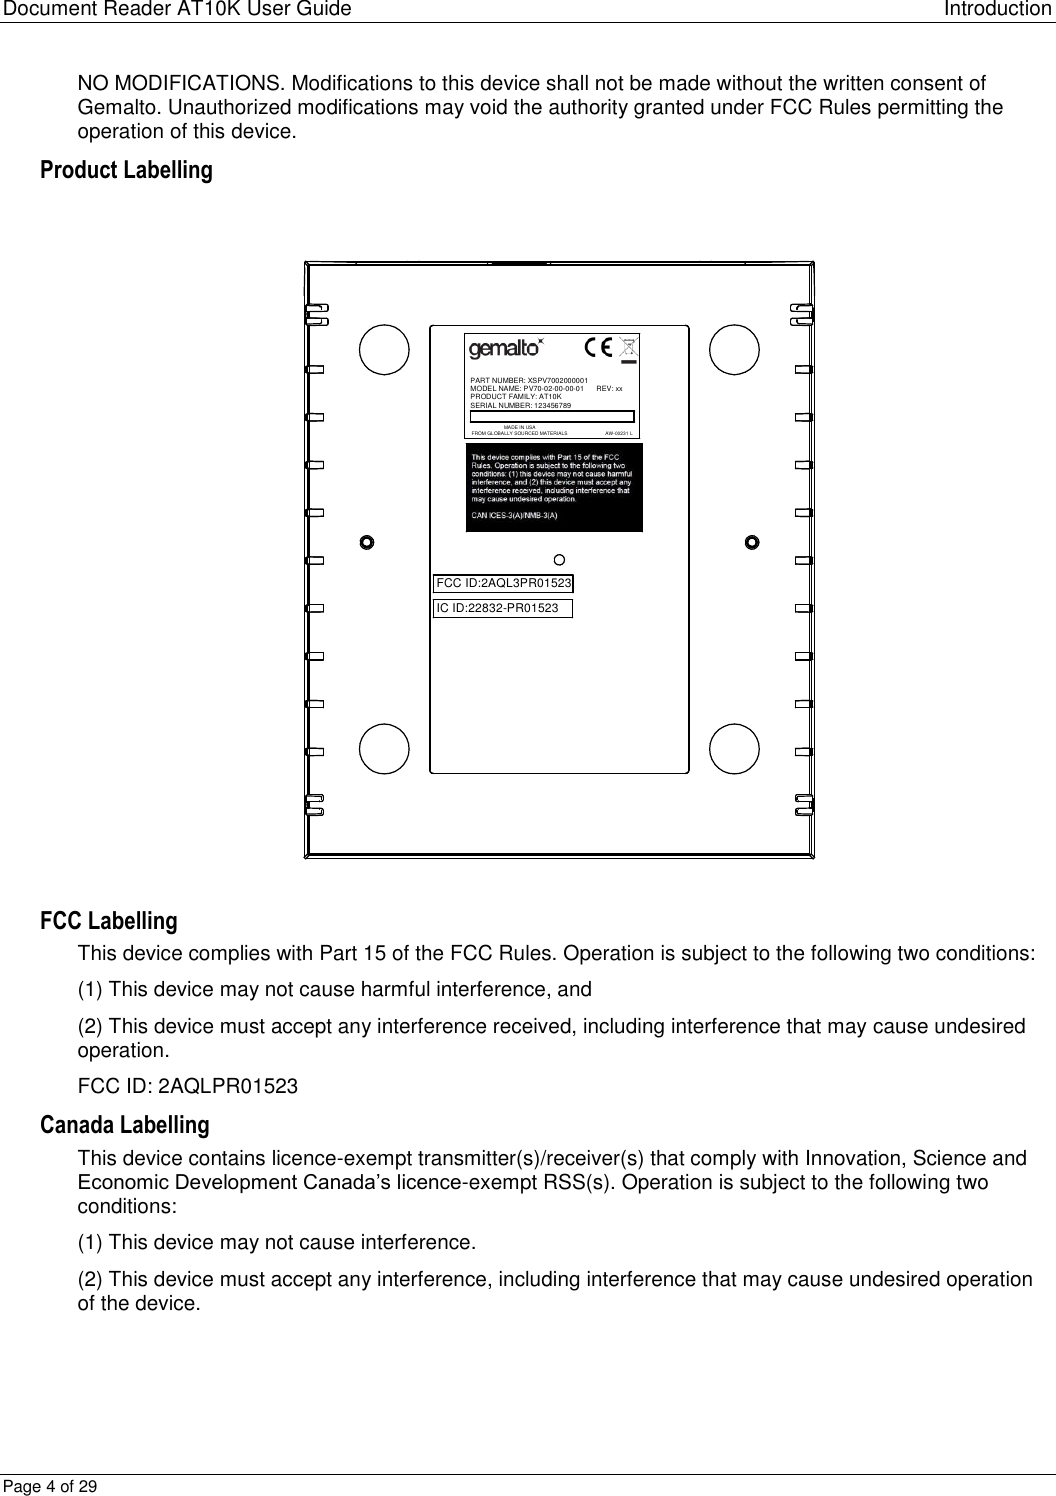 Document Reader AT10K User Guide Introduction Page 4 of 29 NO MODIFICATIONS. Modifications to this device shall not be made without the written consent of Gemalto. Unauthorized modifications may void the authority granted under FCC Rules permitting the operation of this device. Product Labelling  PART NUMBER: XSPV7002000001MODEL NAME: PV70-02-00-00-01      REV: xxPRODUCT FAMILY: AT10KSERIAL NUMBER: 123456789MADE IN USAFROM GLOBALLY SOURCED MATERIALS AW-00231 LFCC ID:2AQL3PR01523IC ID:22832-PR01523 FCC Labelling This device complies with Part 15 of the FCC Rules. Operation is subject to the following two conditions: (1) This device may not cause harmful interference, and (2) This device must accept any interference received, including interference that may cause undesired operation. FCC ID: 2AQLPR01523 Canada Labelling This device contains licence-exempt transmitter(s)/receiver(s) that comply with Innovation, Science and Economic Development Canada’s licence-exempt RSS(s). Operation is subject to the following two conditions: (1) This device may not cause interference. (2) This device must accept any interference, including interference that may cause undesired operation of the device.  